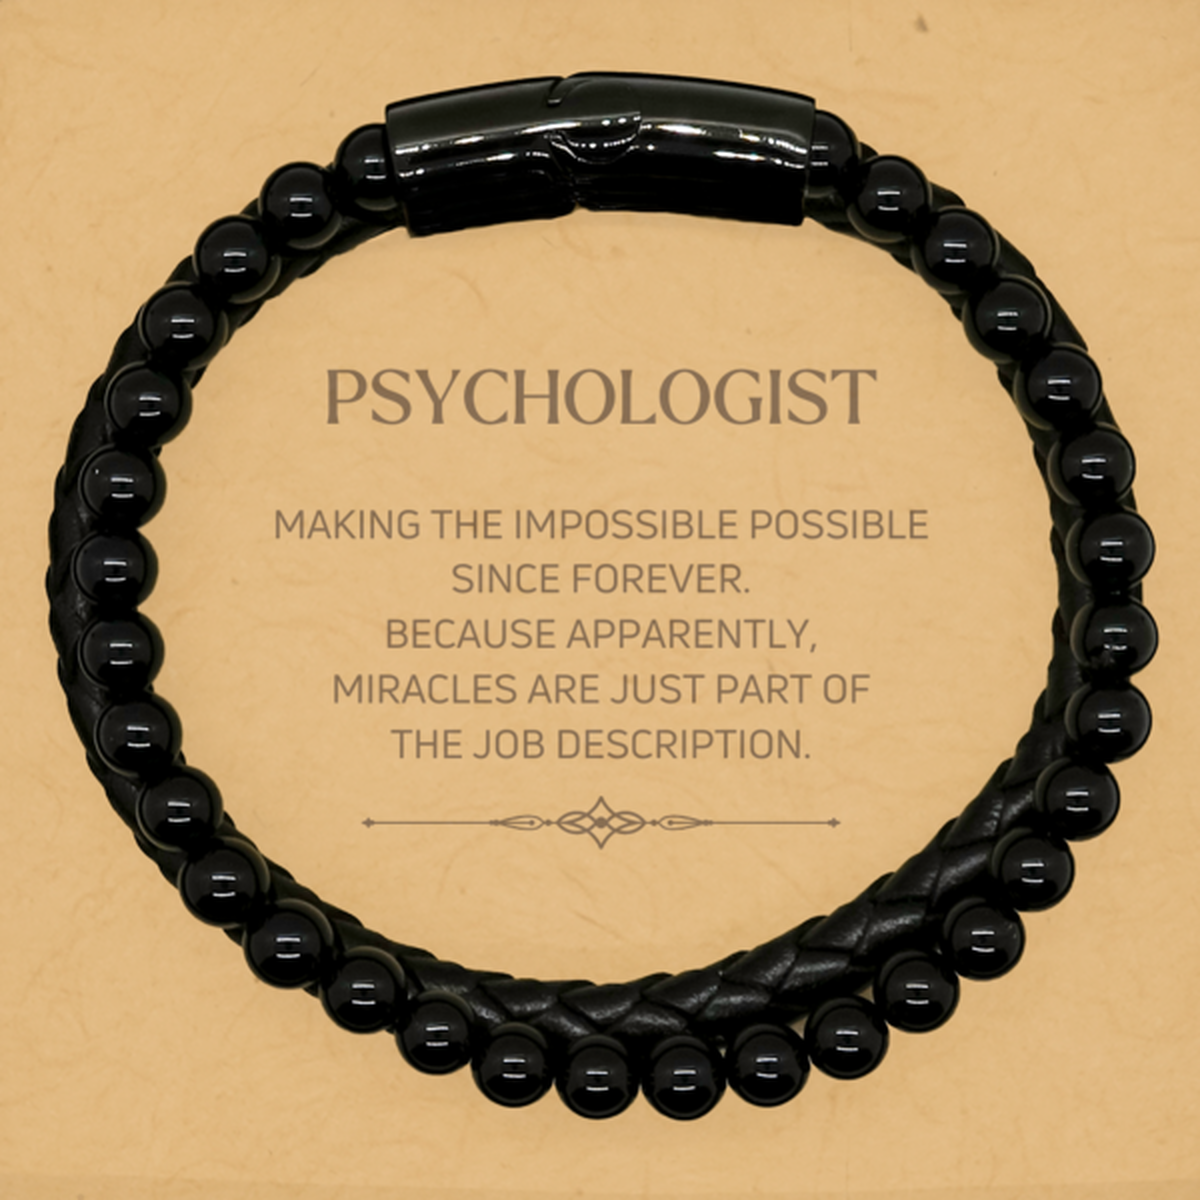 Funny Psychologist Gifts, Miracles are just part of the job description, Inspirational Birthday Stone Leather Bracelets For Psychologist, Men, Women, Coworkers, Friends, Boss